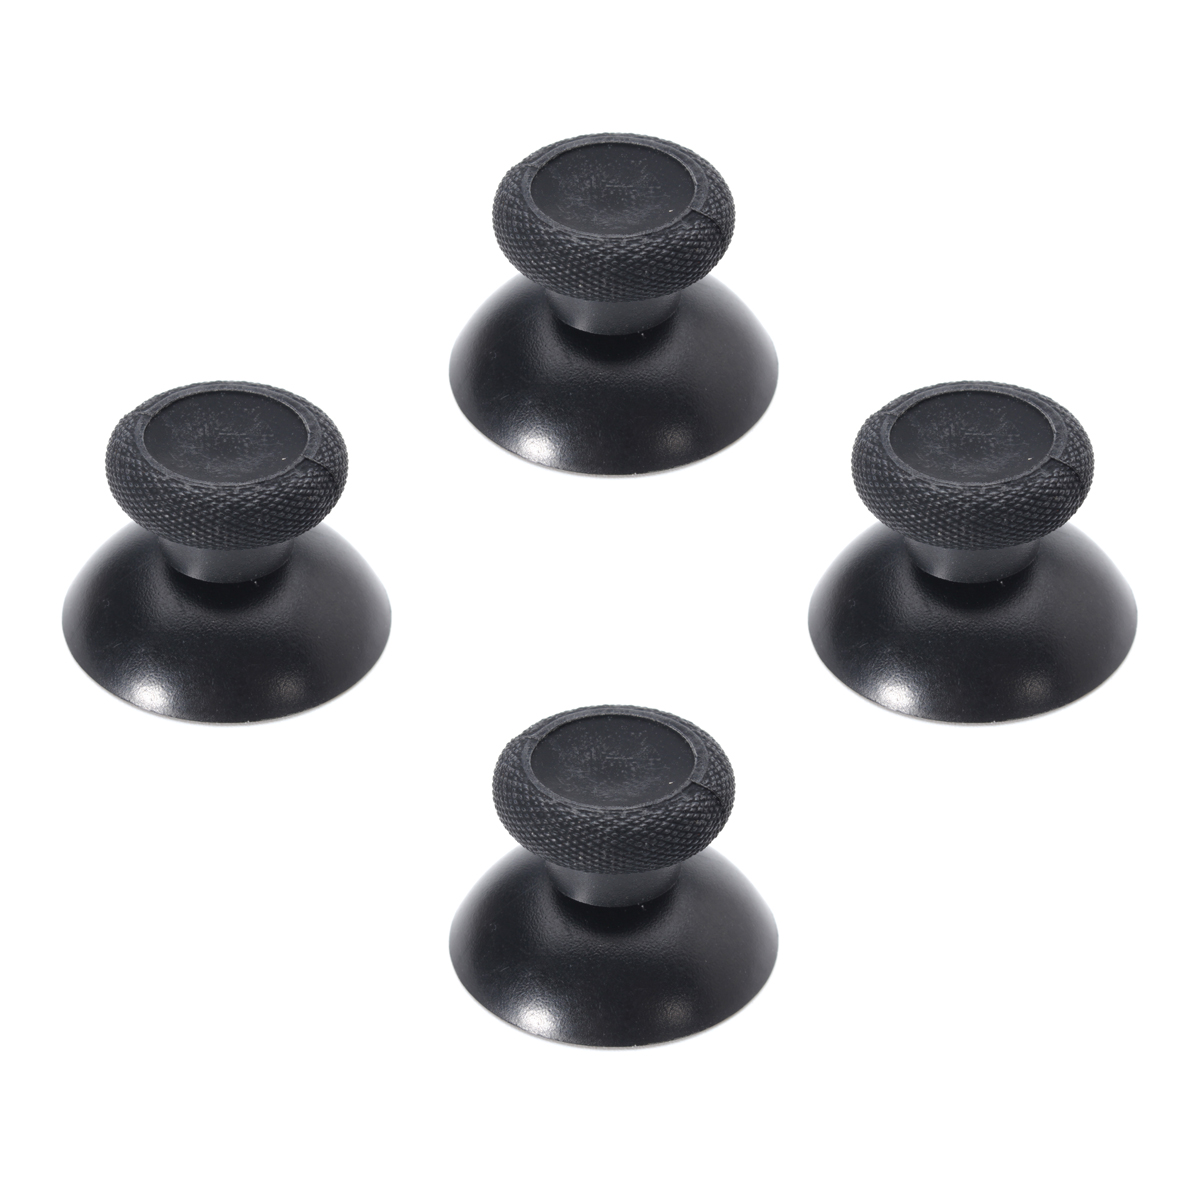 4-Pcs-Analog-Stick-Caps-Joystick-for-Microsoft-Xbox-One-Thumbstick-Game-Controller-Gamepad-Handle-Ro-1411984